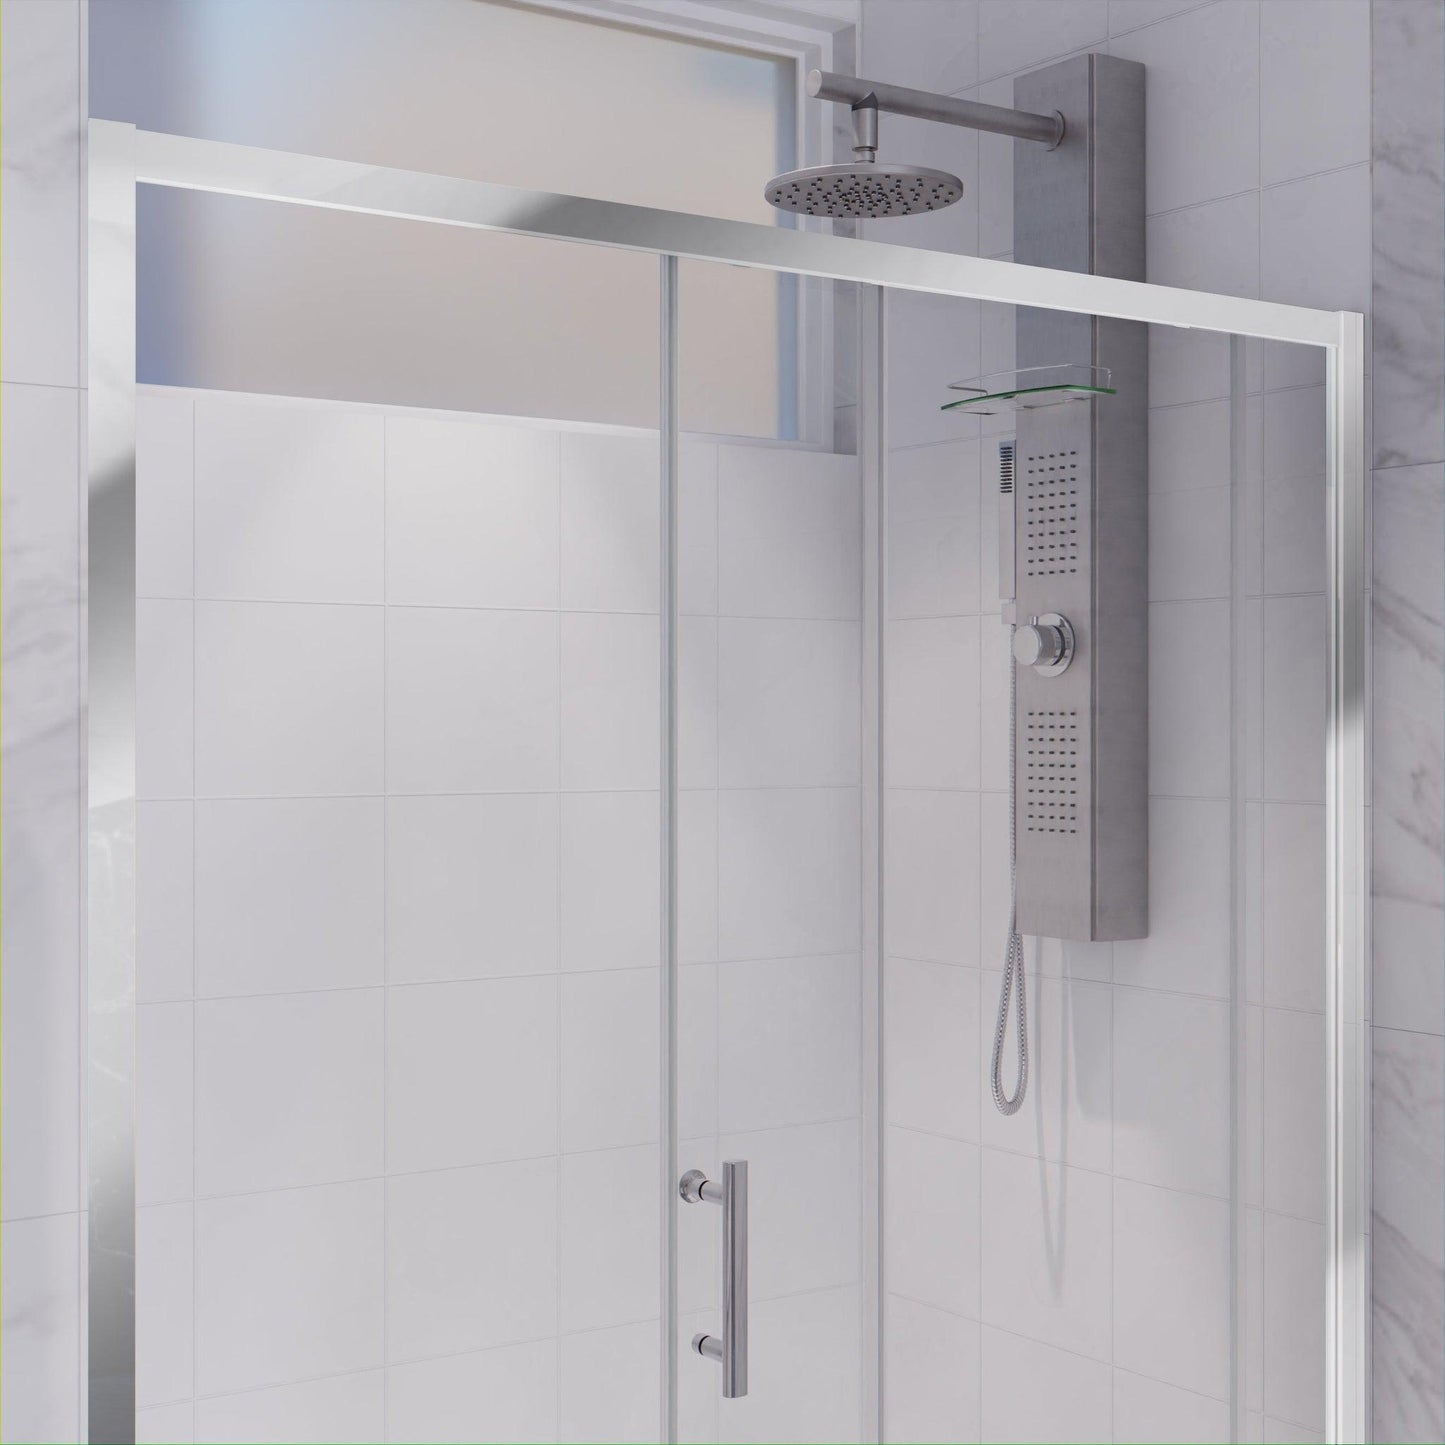 ANZZI Halberd Series 48" x 72" Framed Rectangular Polished Chrome Sliding Shower Door With Handle and Tsunami Guard